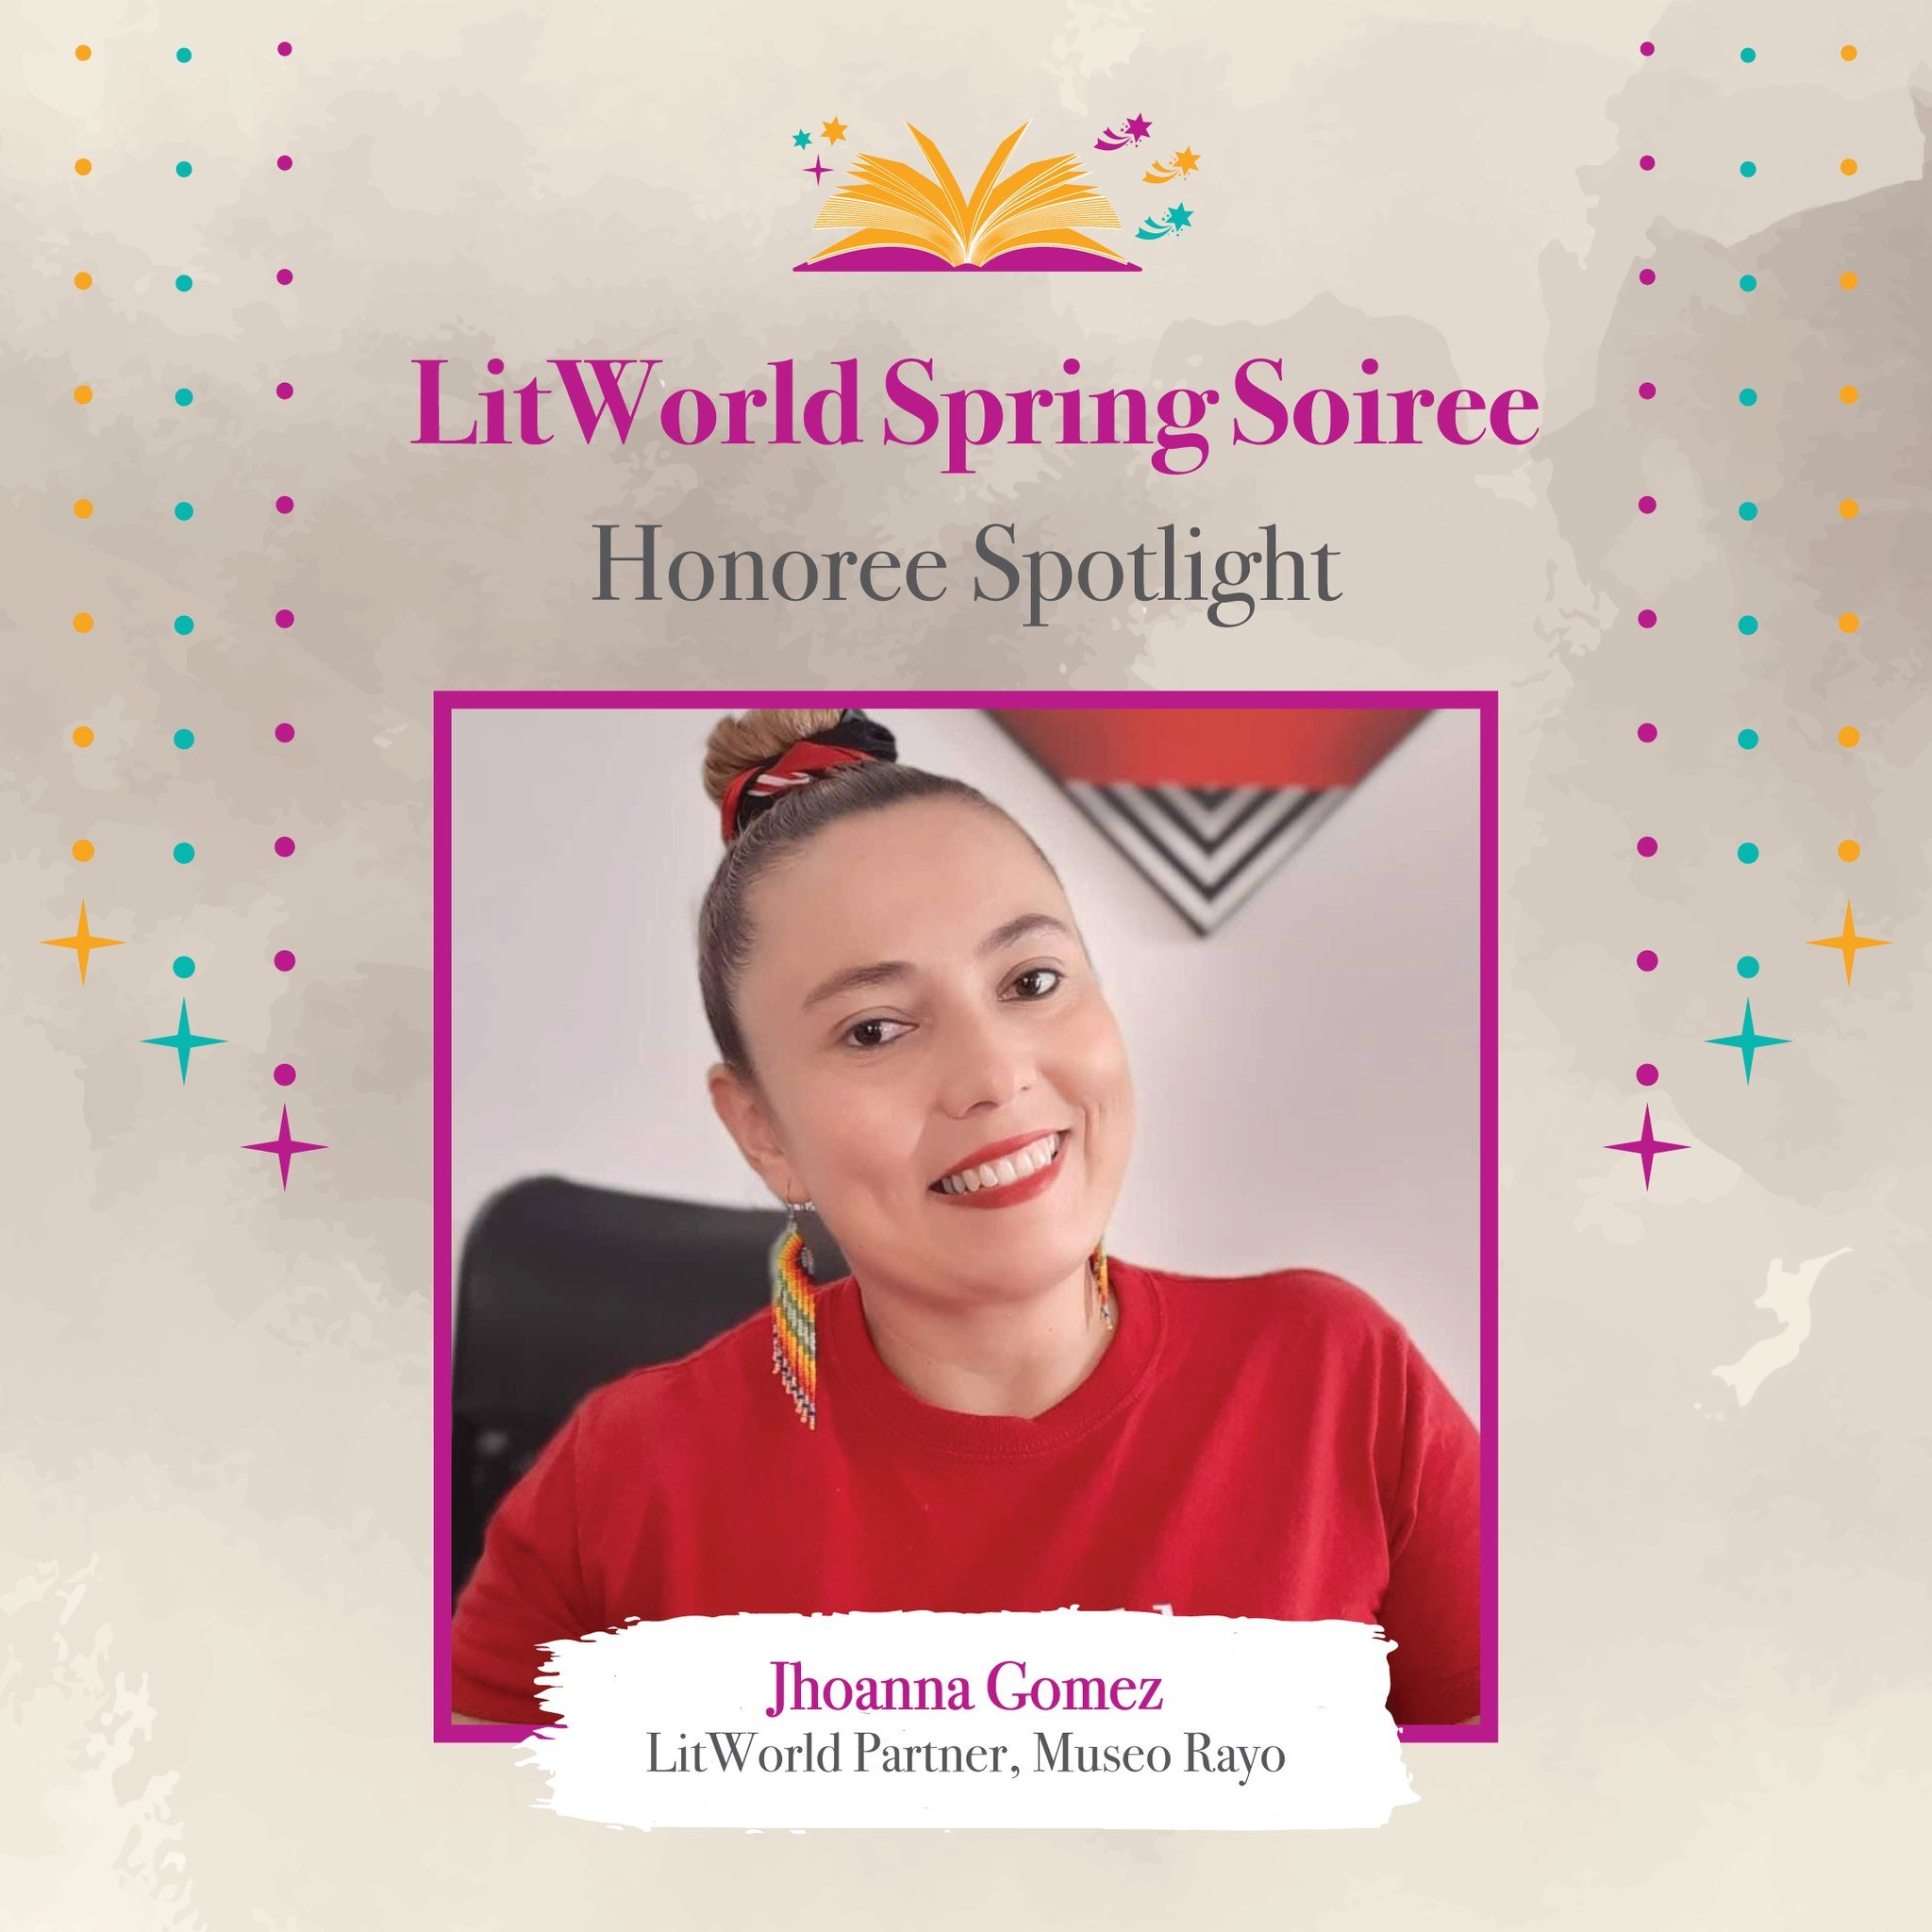 Meet our Spring Soiree Honoree: Jhoanna Gomez ✨

A dedicated and long-standing partner of LitWorld since 2014, Jhoanna has been the heart of our LitClub programs at @museorayo, Colombia, for ten years. A fierce advocate for children's rights and a be